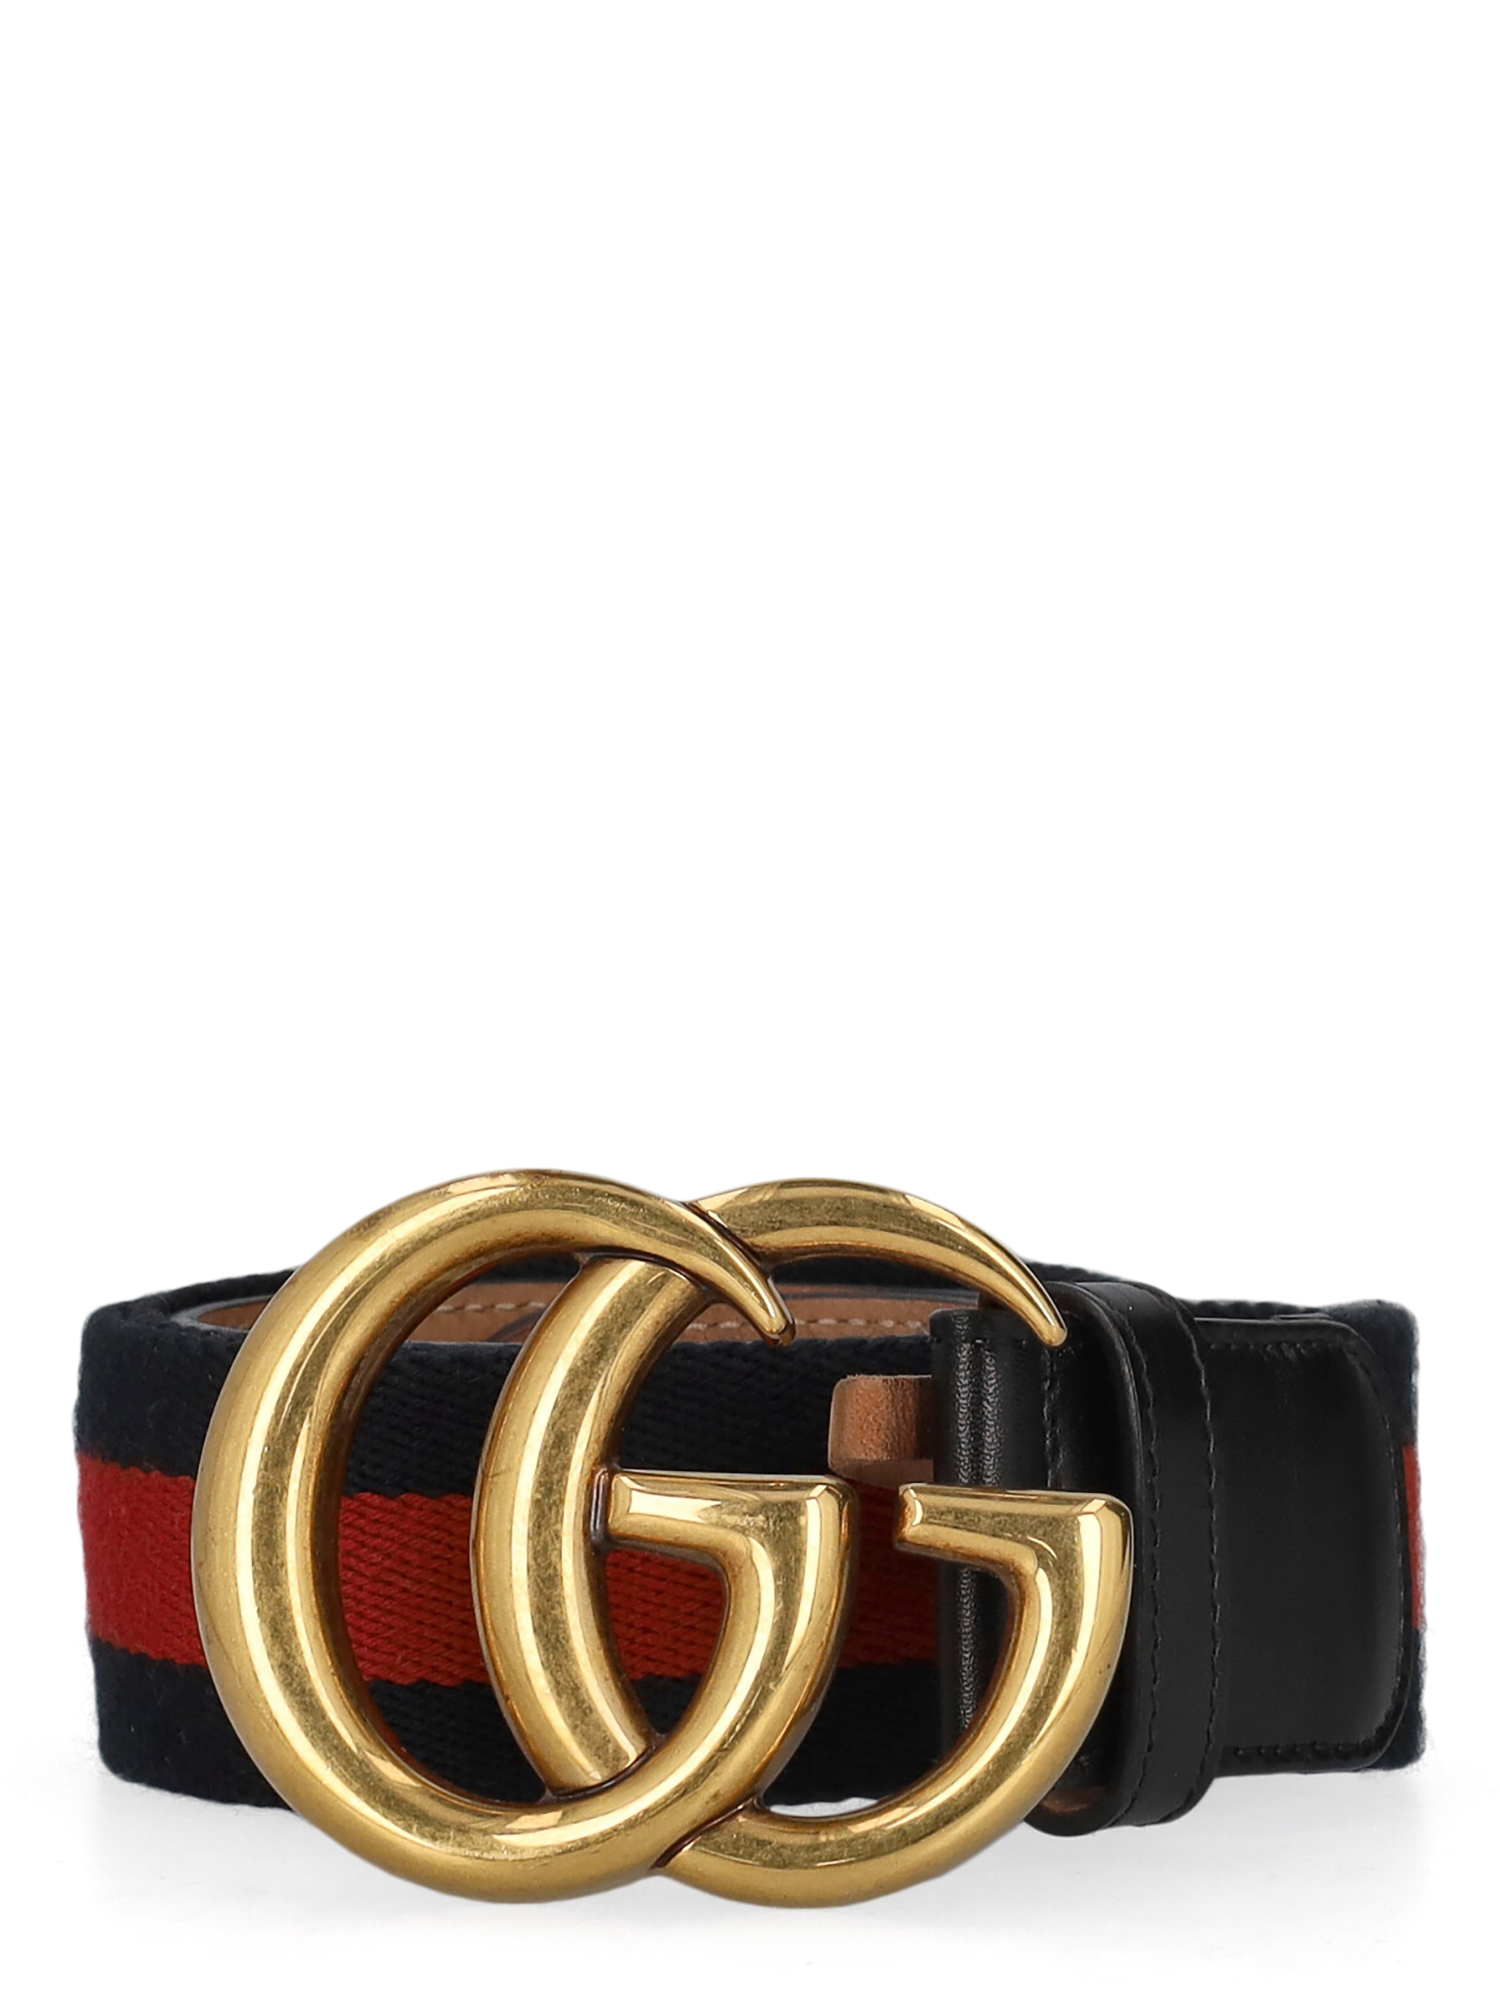 Pre-owned Gucci Women's Belts -  - In Navy, Red Fabric